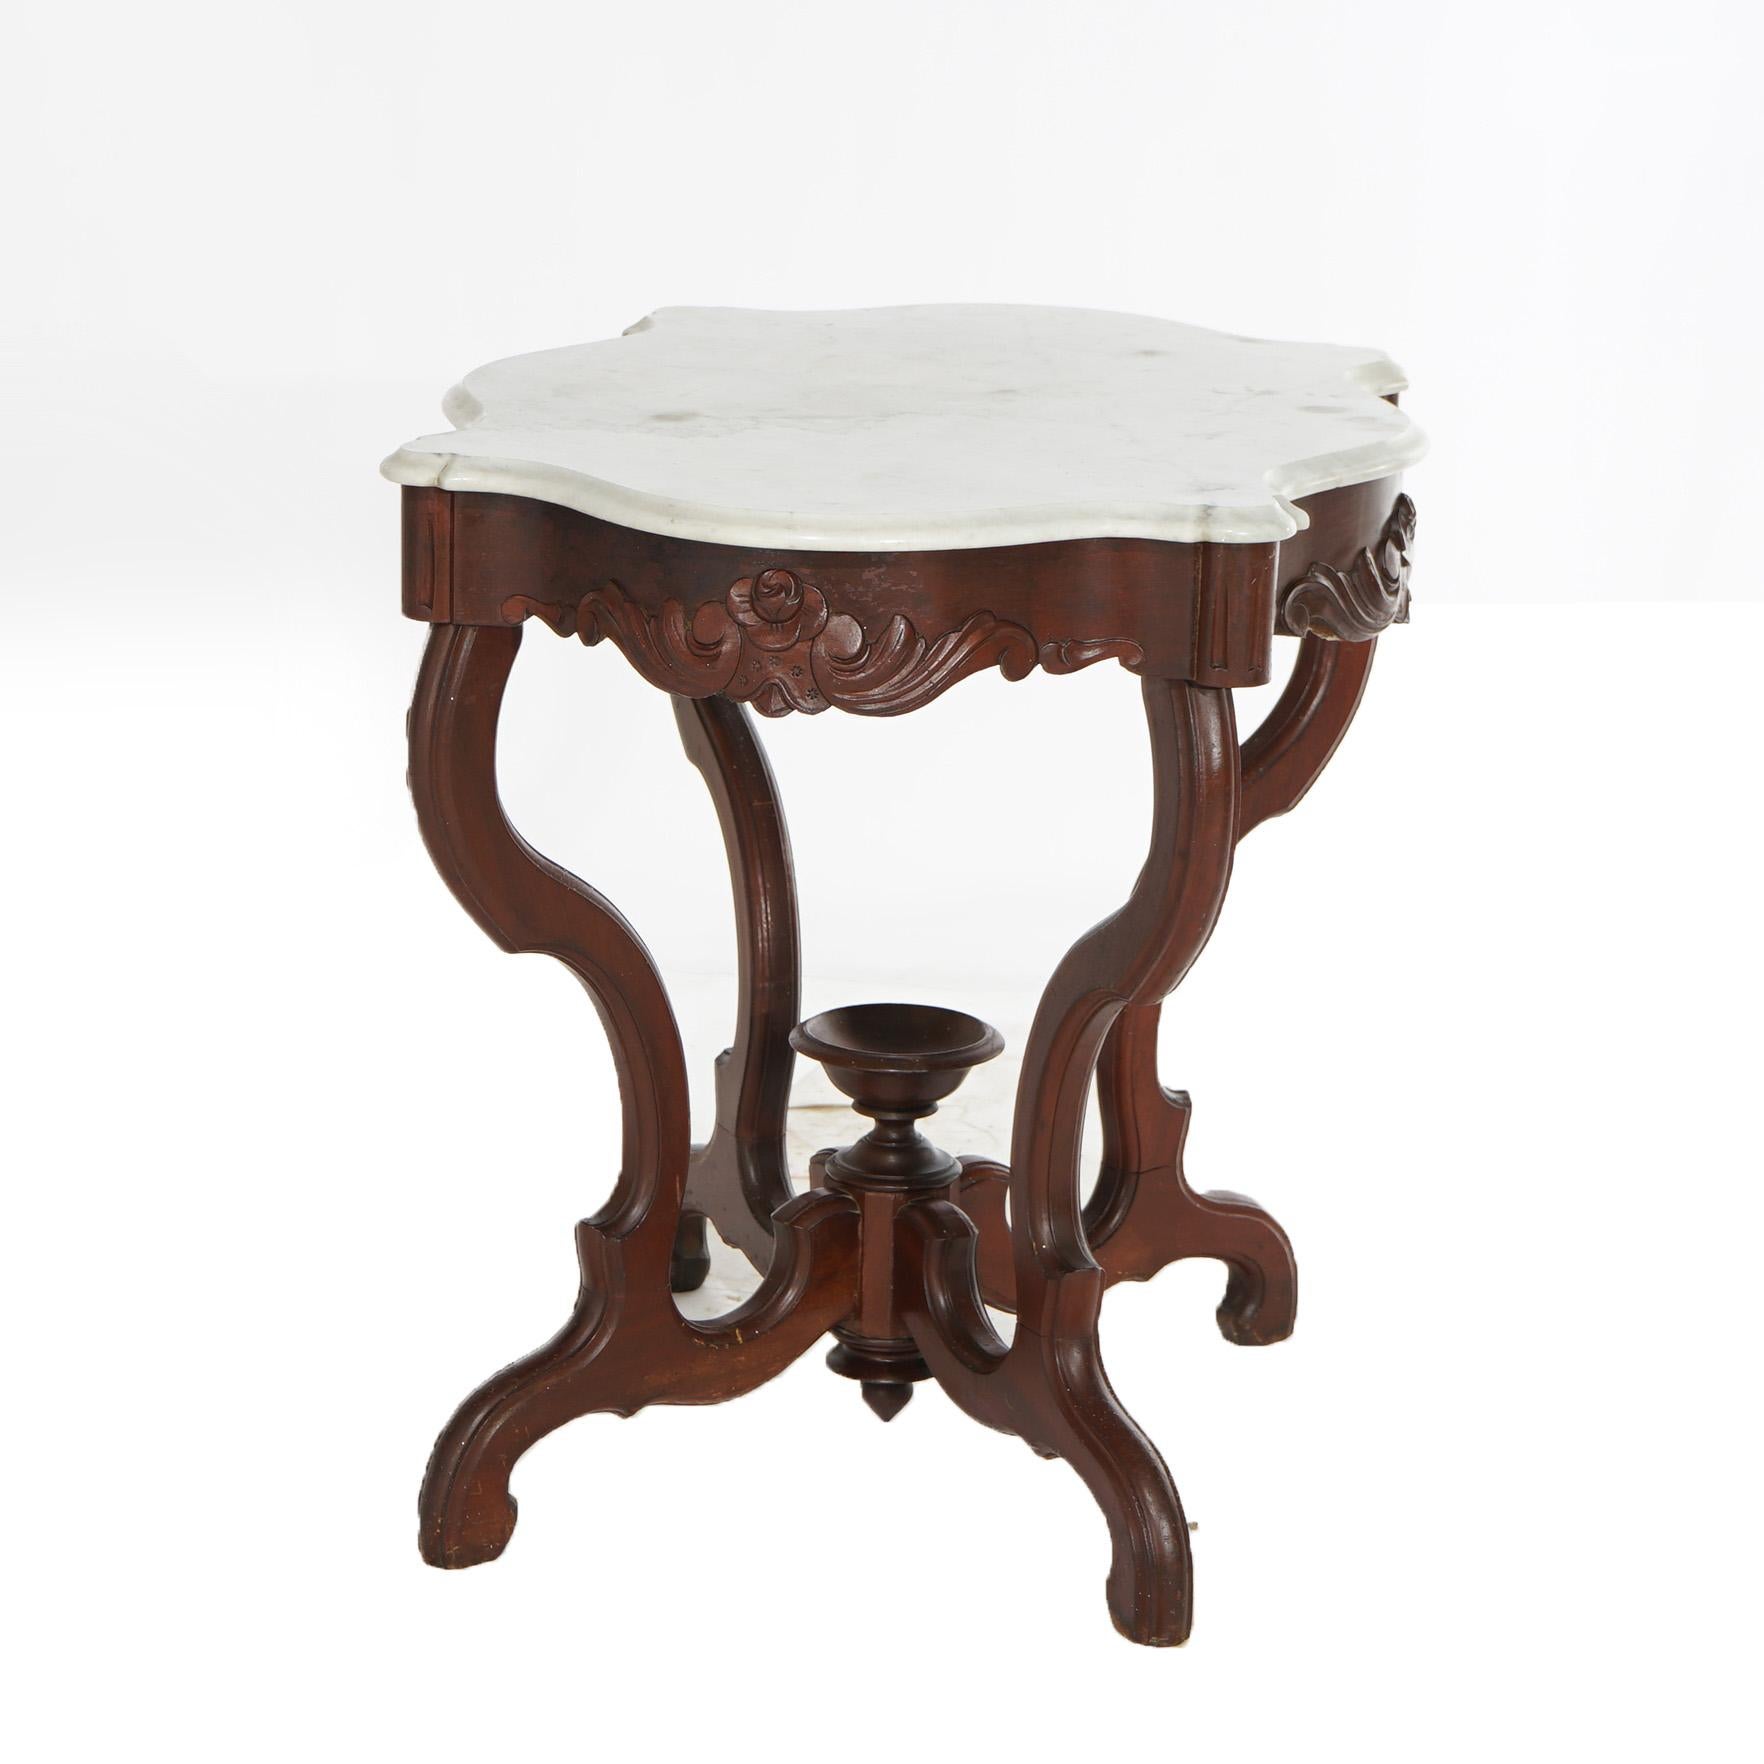 19th Century Antique Victorian Turtle Top Marble & Carved Walnut Parlor Table Circa 1890